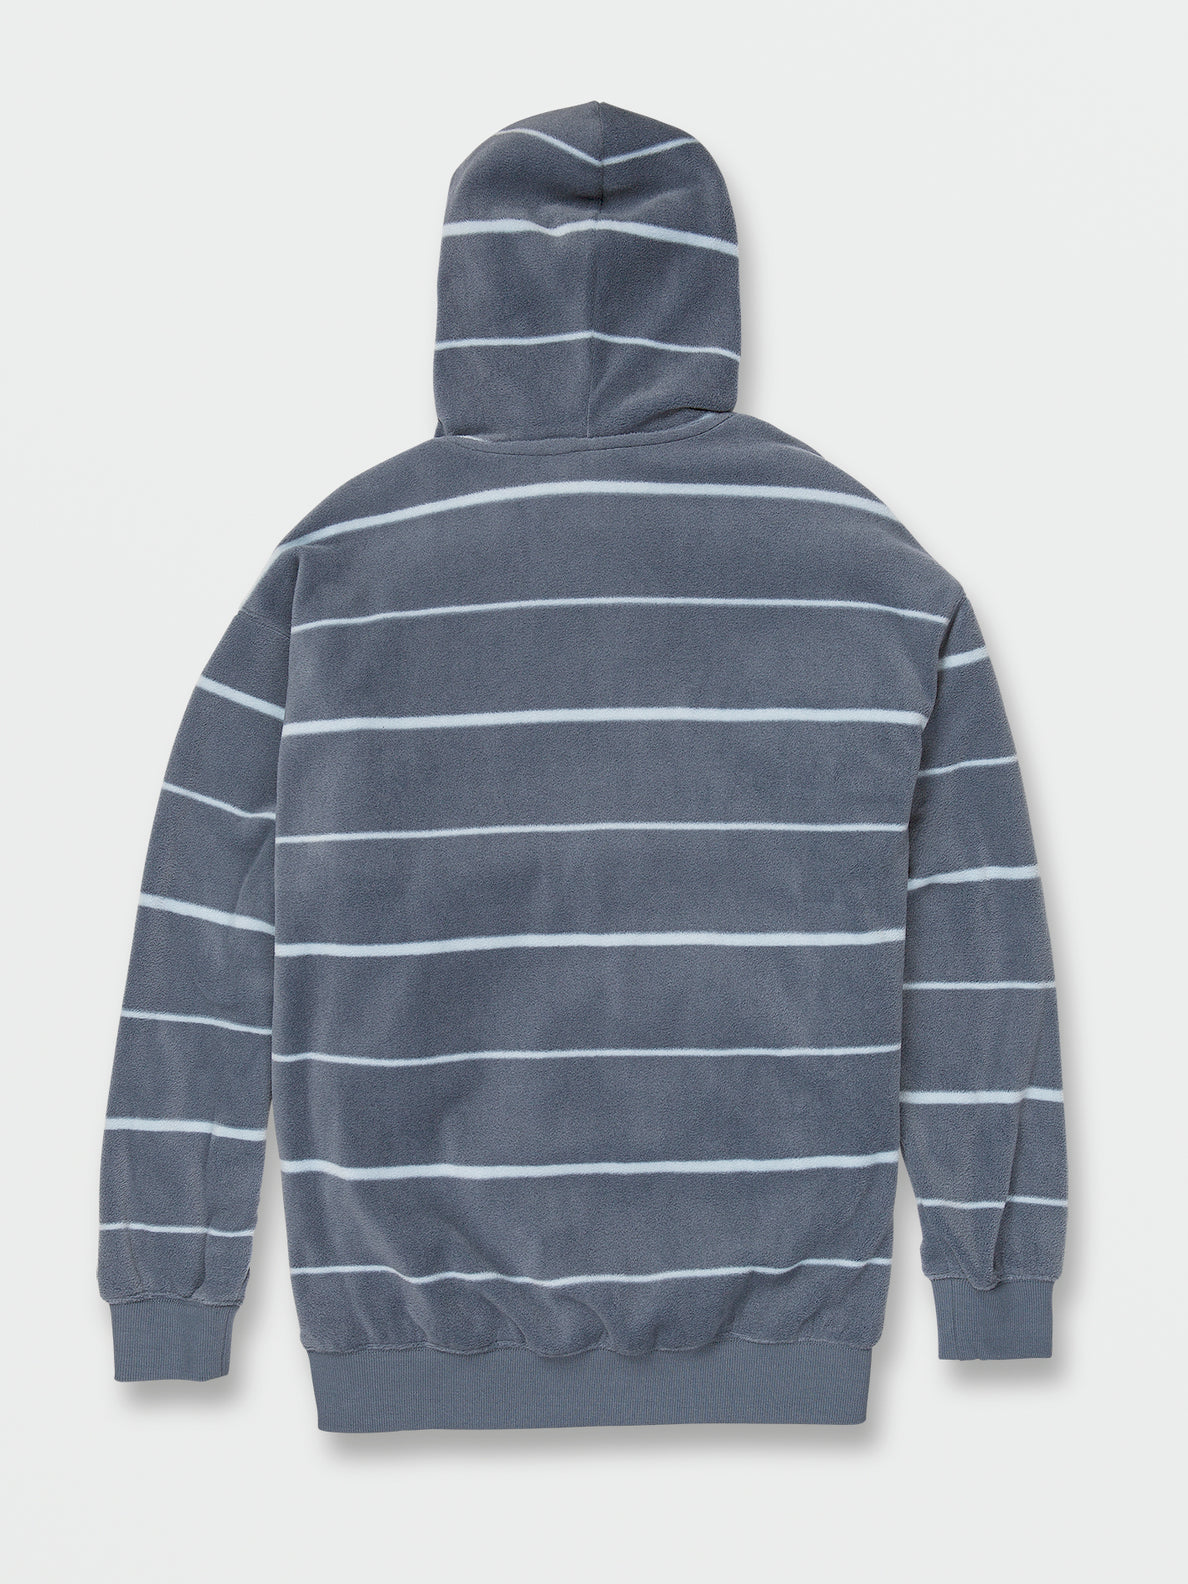 Throw Exceptions Pullover Hoodie - Slate Blue